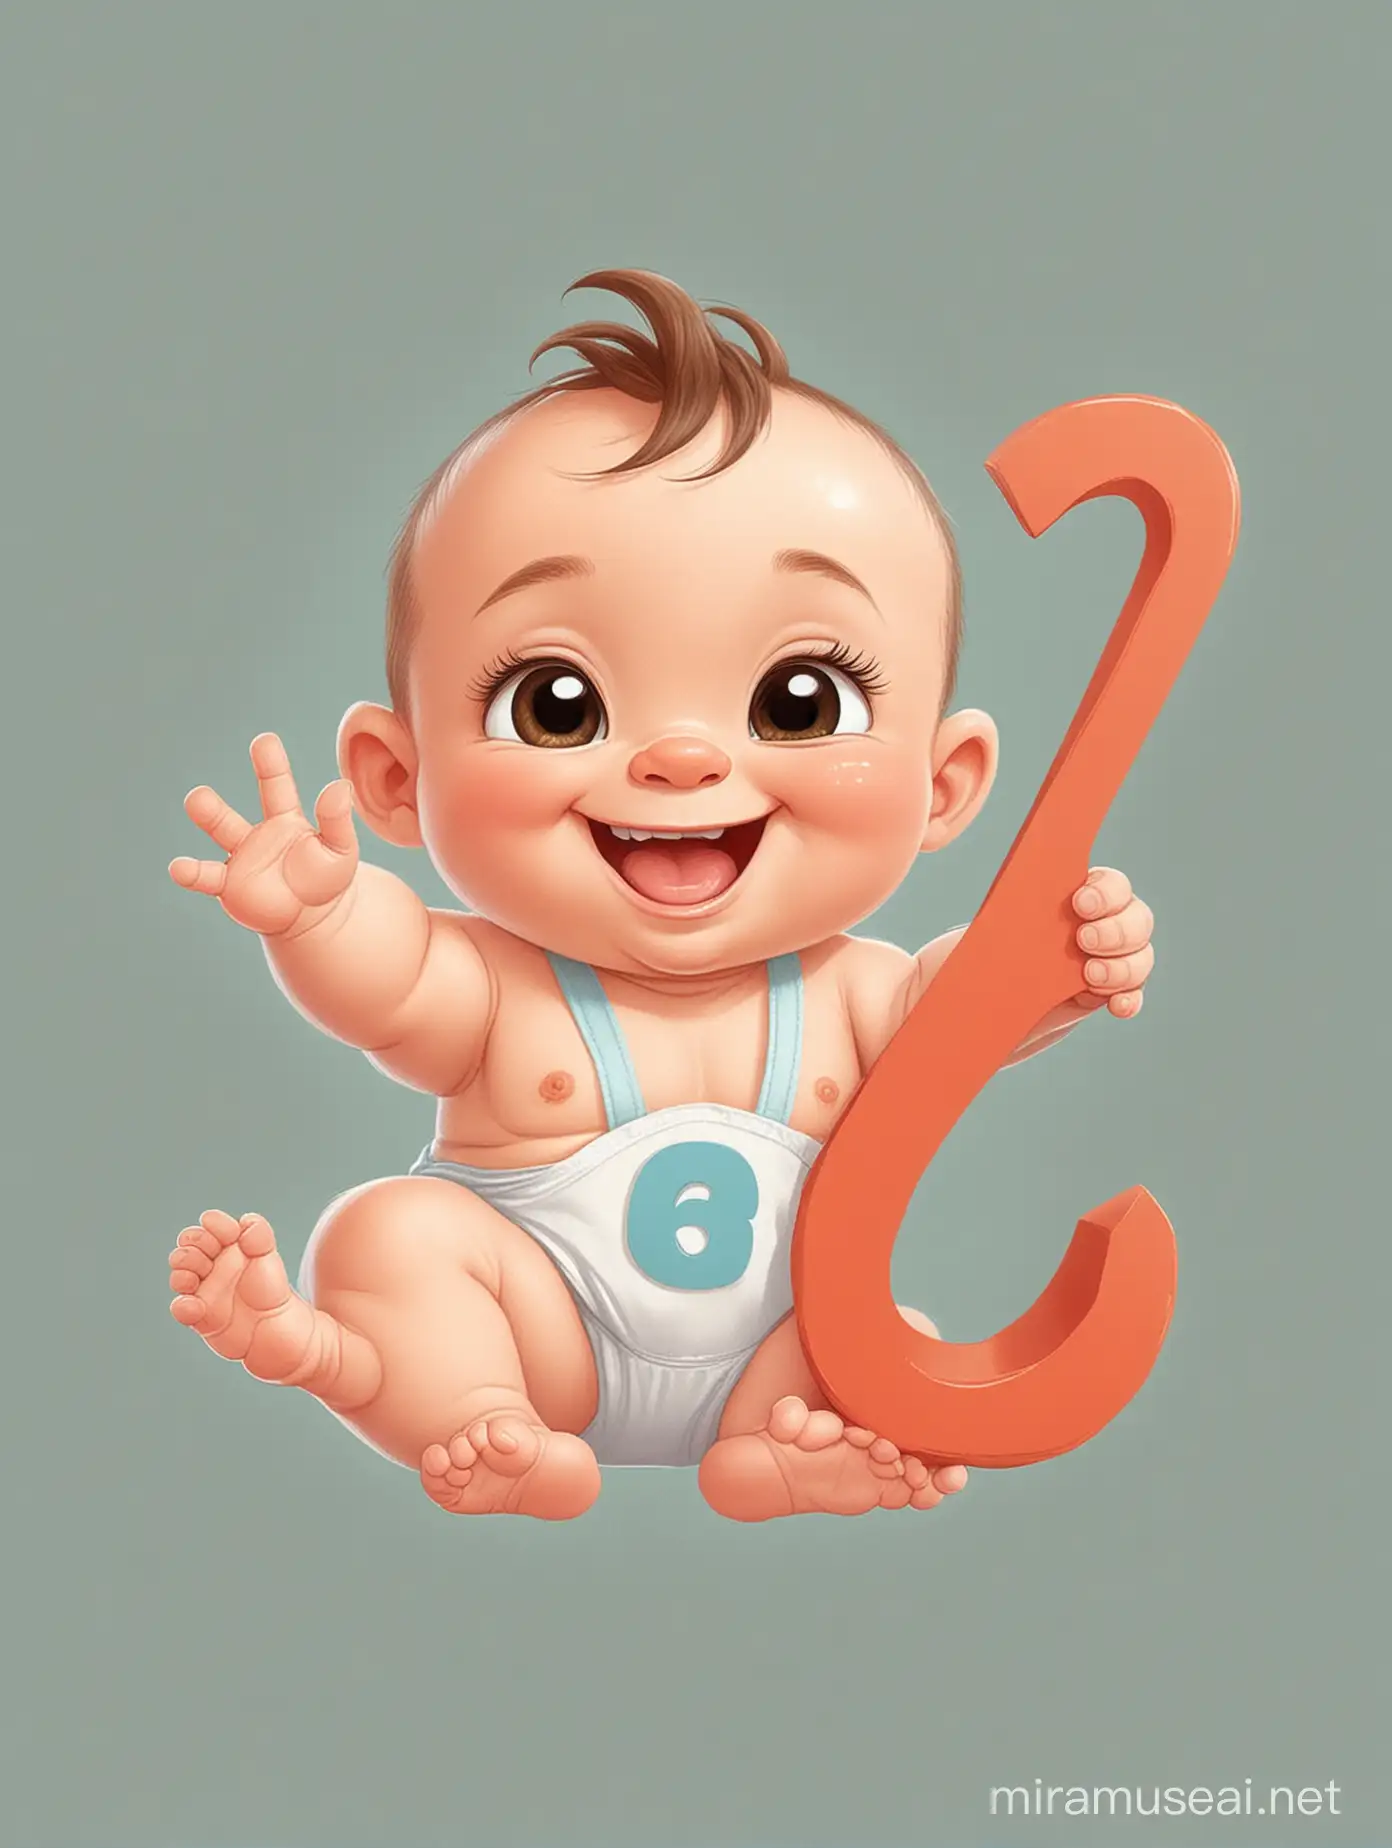 Cheerful Cartoon Baby Holding Number 6 with a Bright Smile